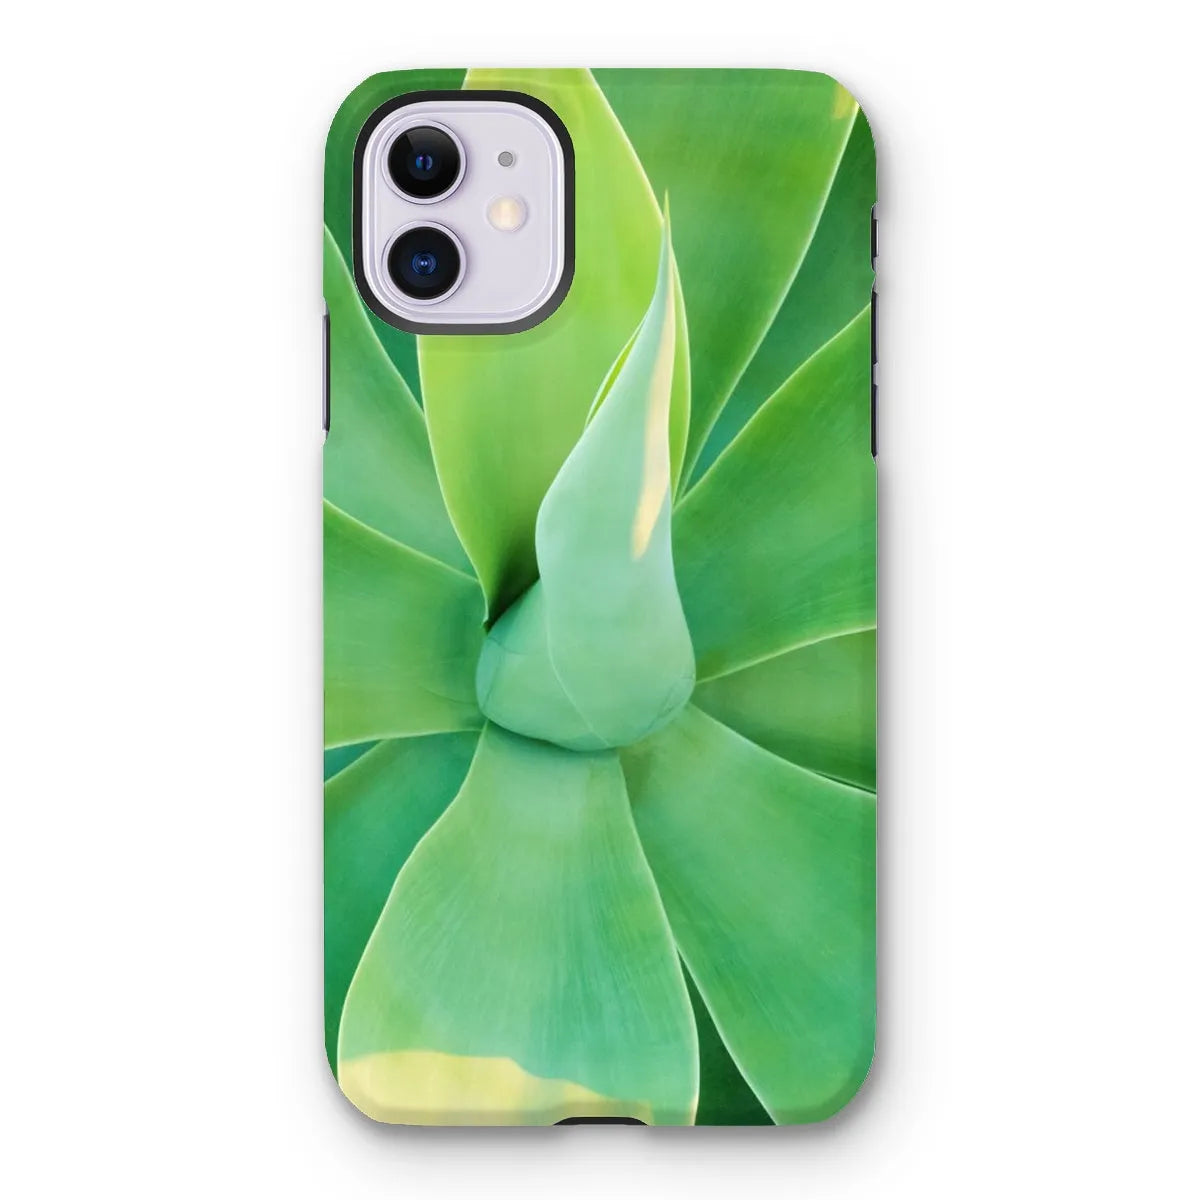 In Bloom Too Tough Phone Case - Iphone 11 / Matte - Mobile Phone Cases - Aesthetic Art